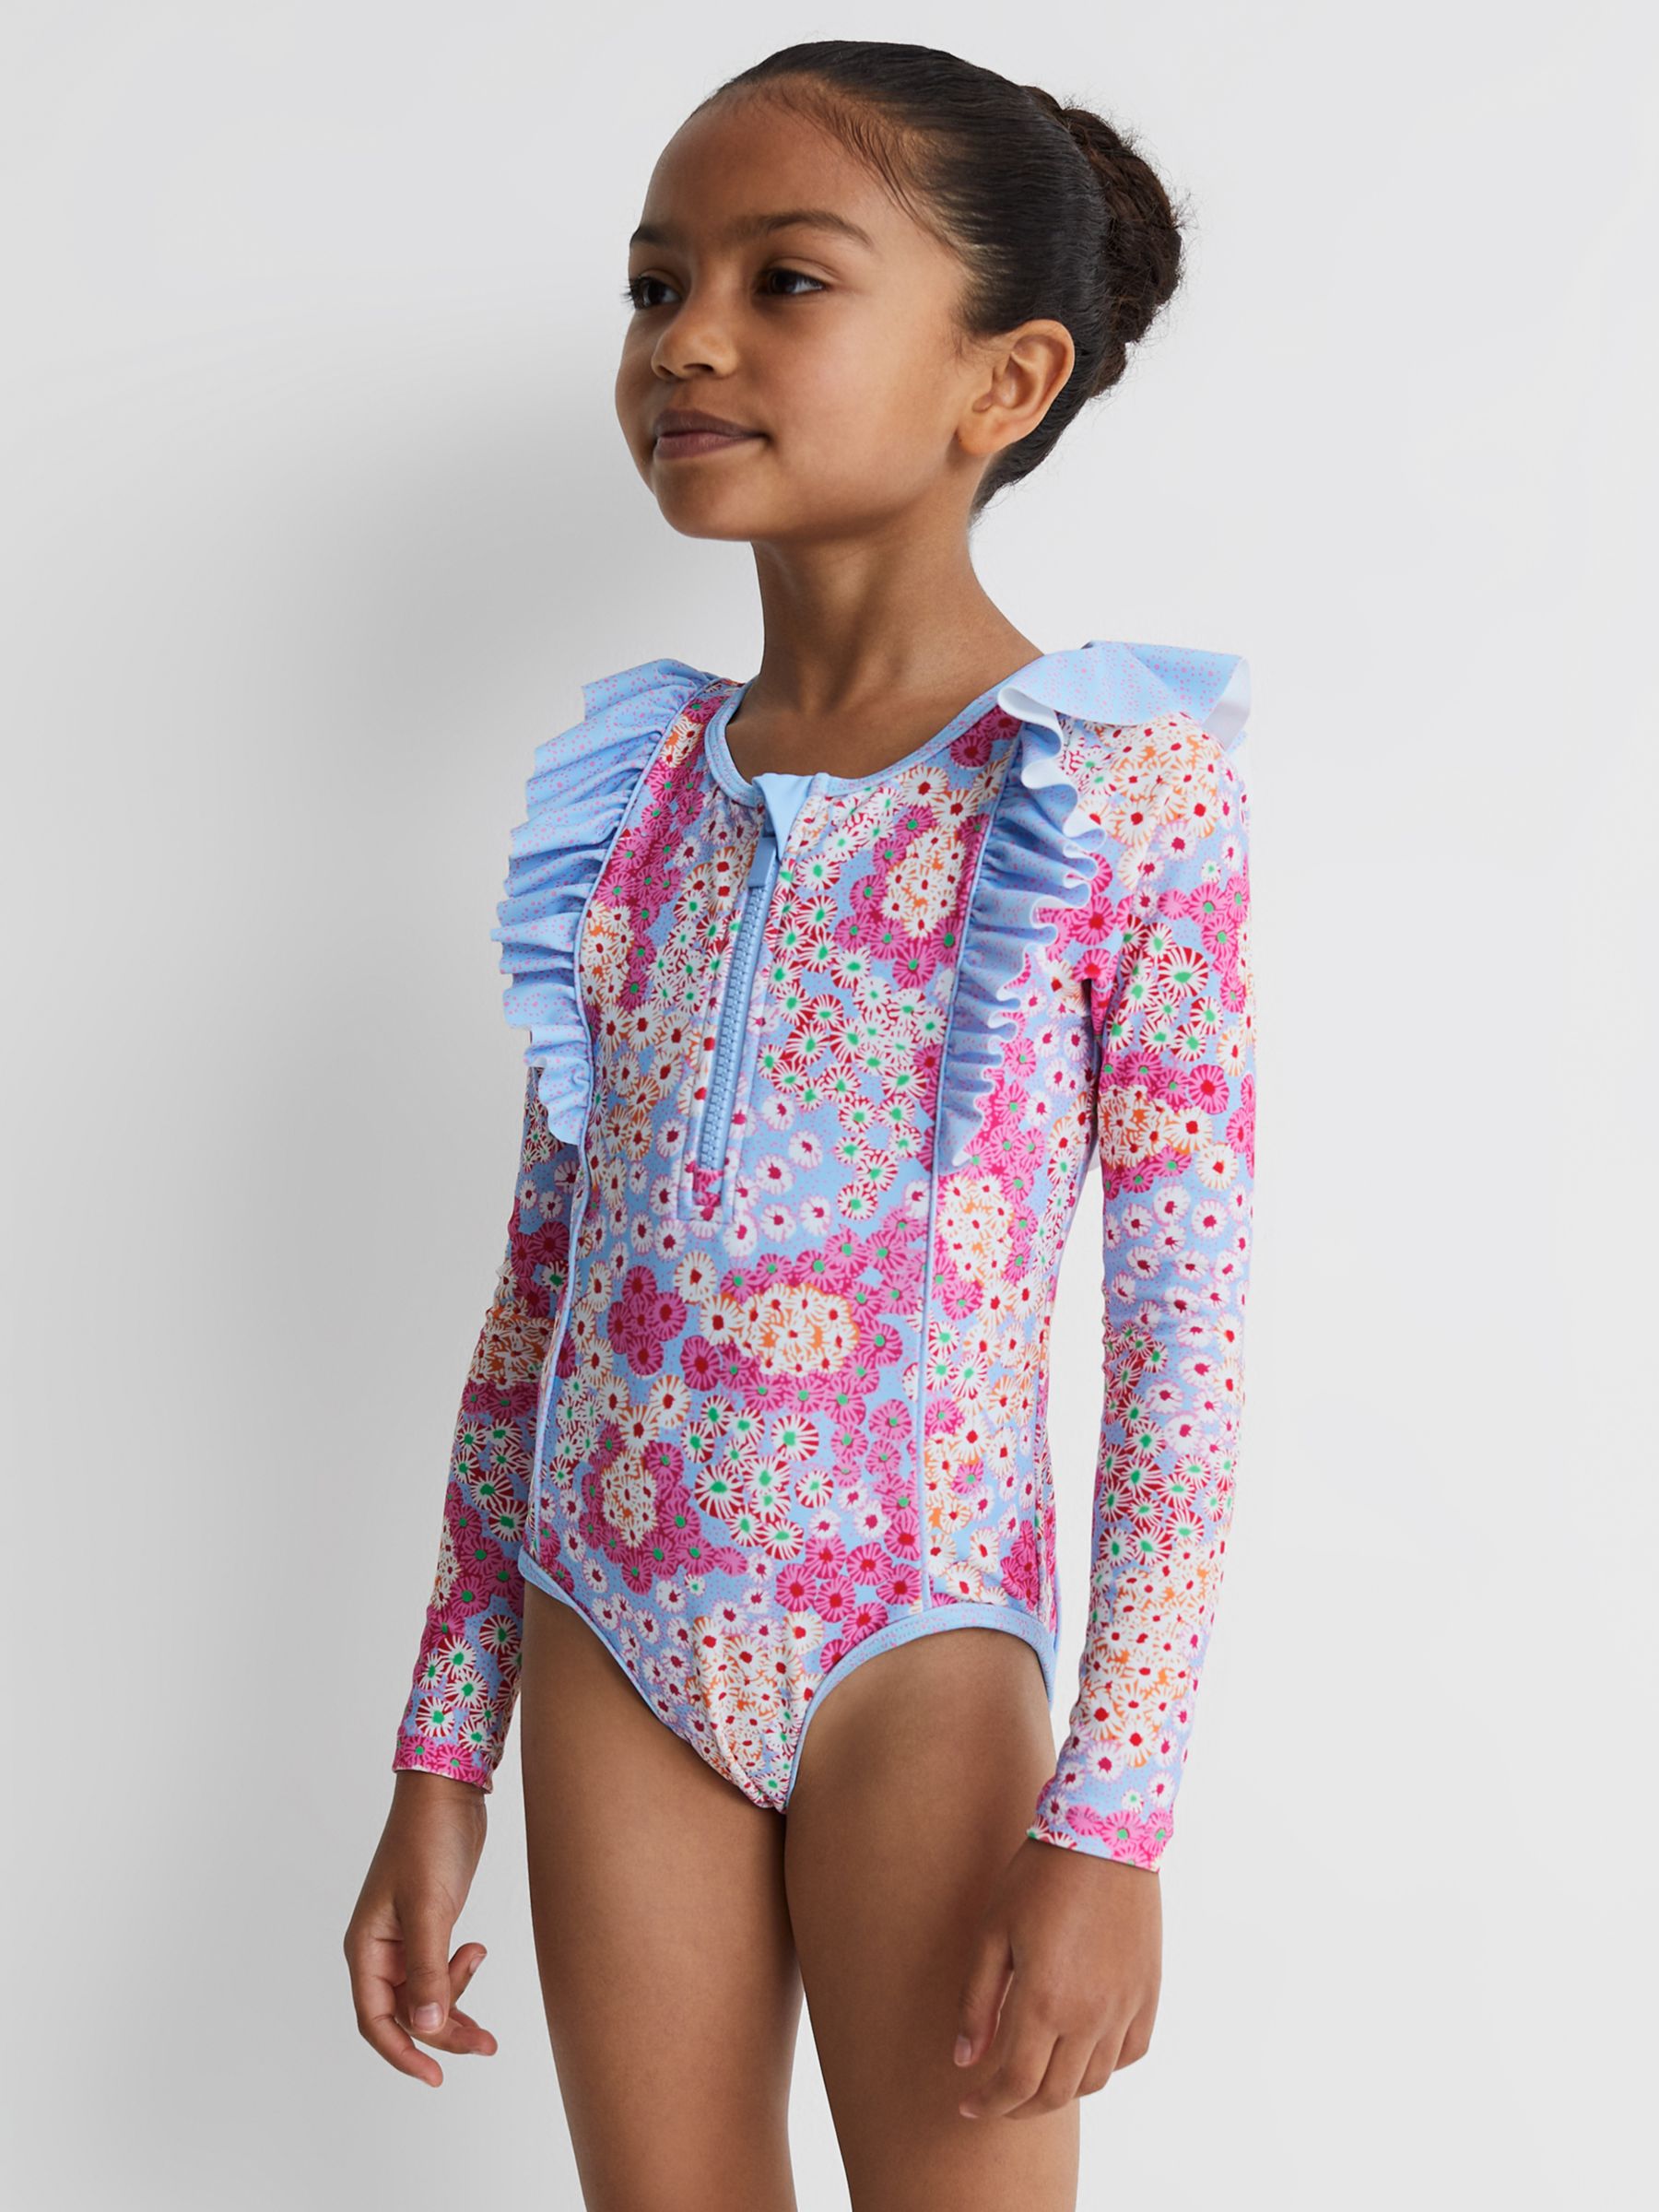 Buy Reiss Kids' Poppy Floral Print Ruffle Sunsafe Swimsuit, Pink/Multi Online at johnlewis.com